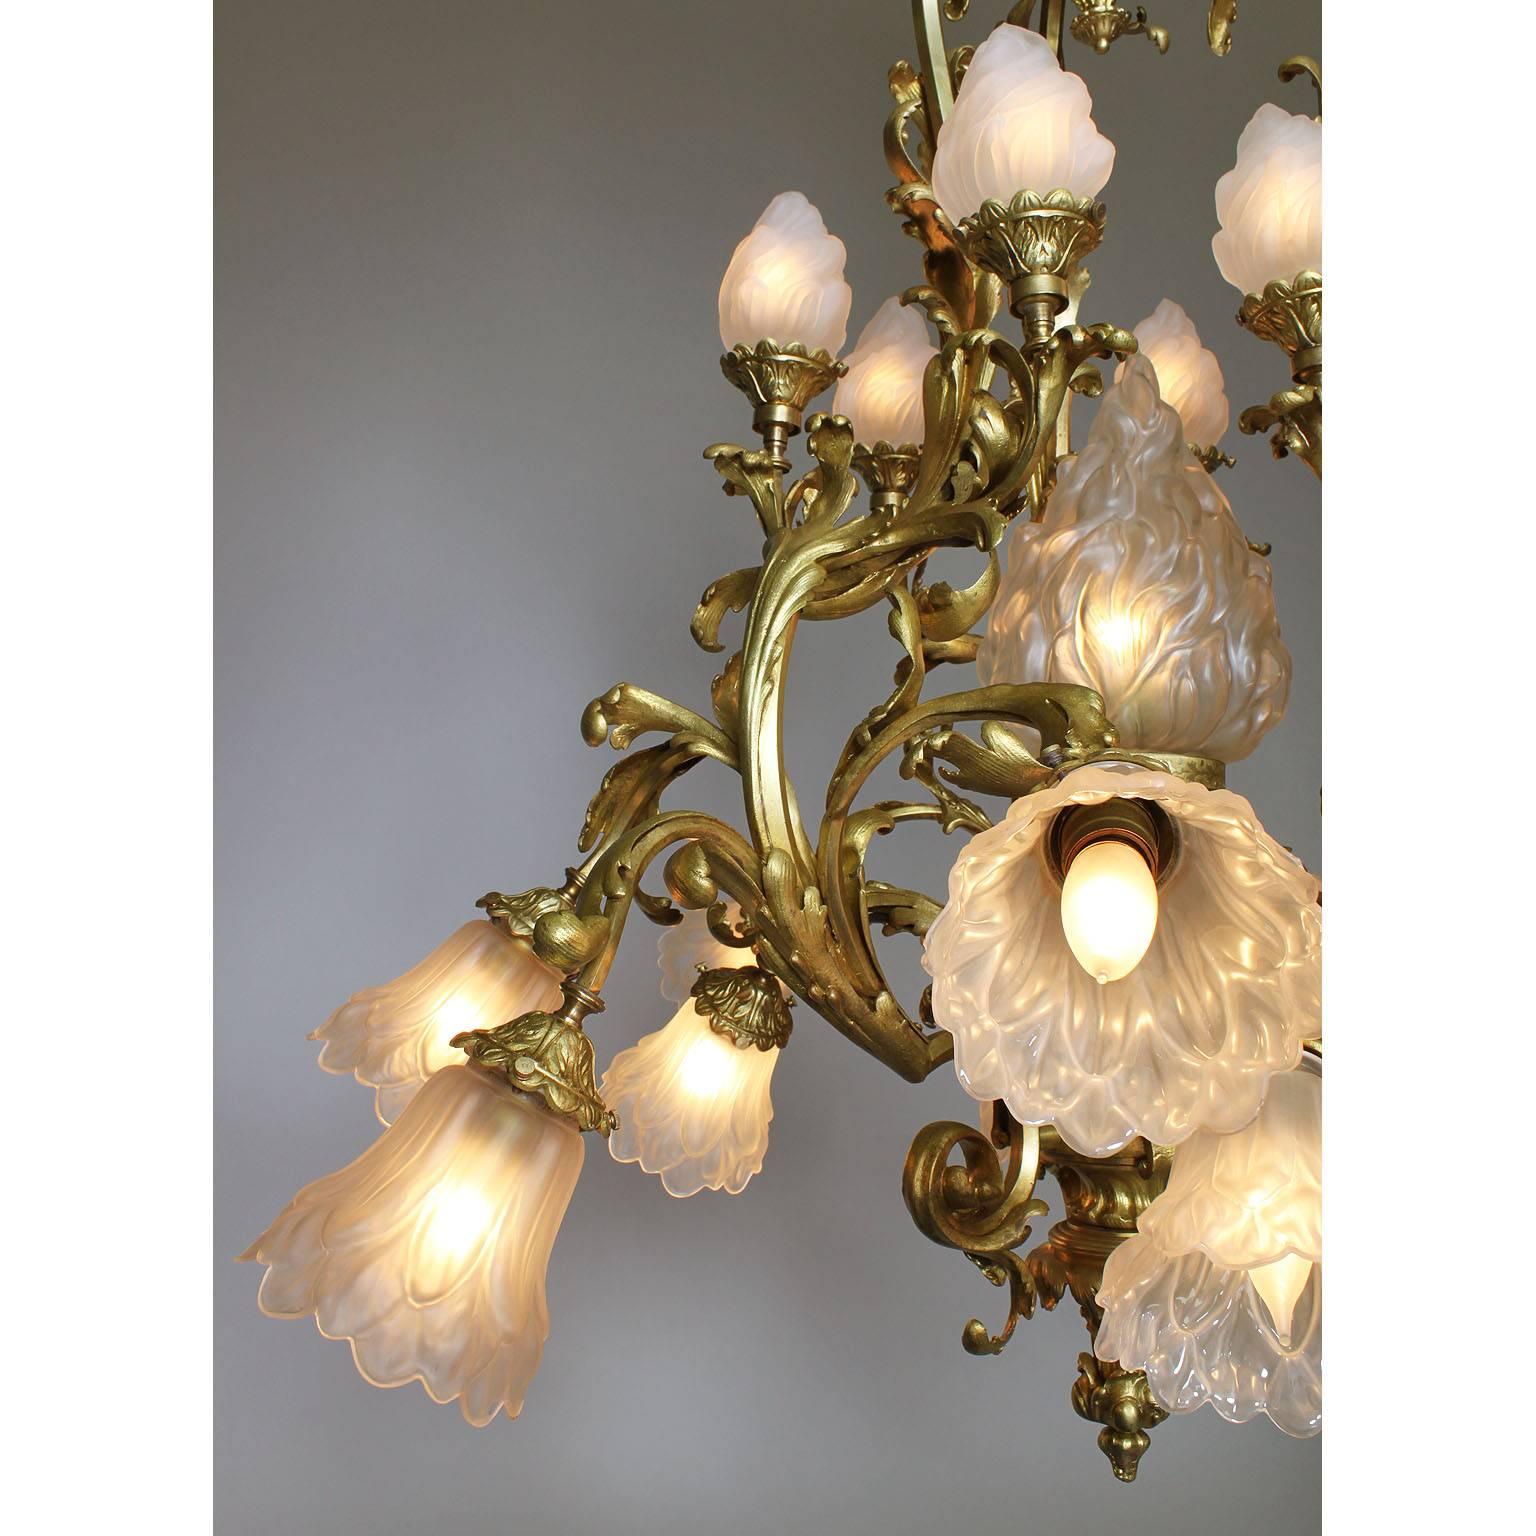 French Belle Époque Rococo Style Gilt-Bronze and Frosted Glass Shades Chandelier In Fair Condition For Sale In Los Angeles, CA